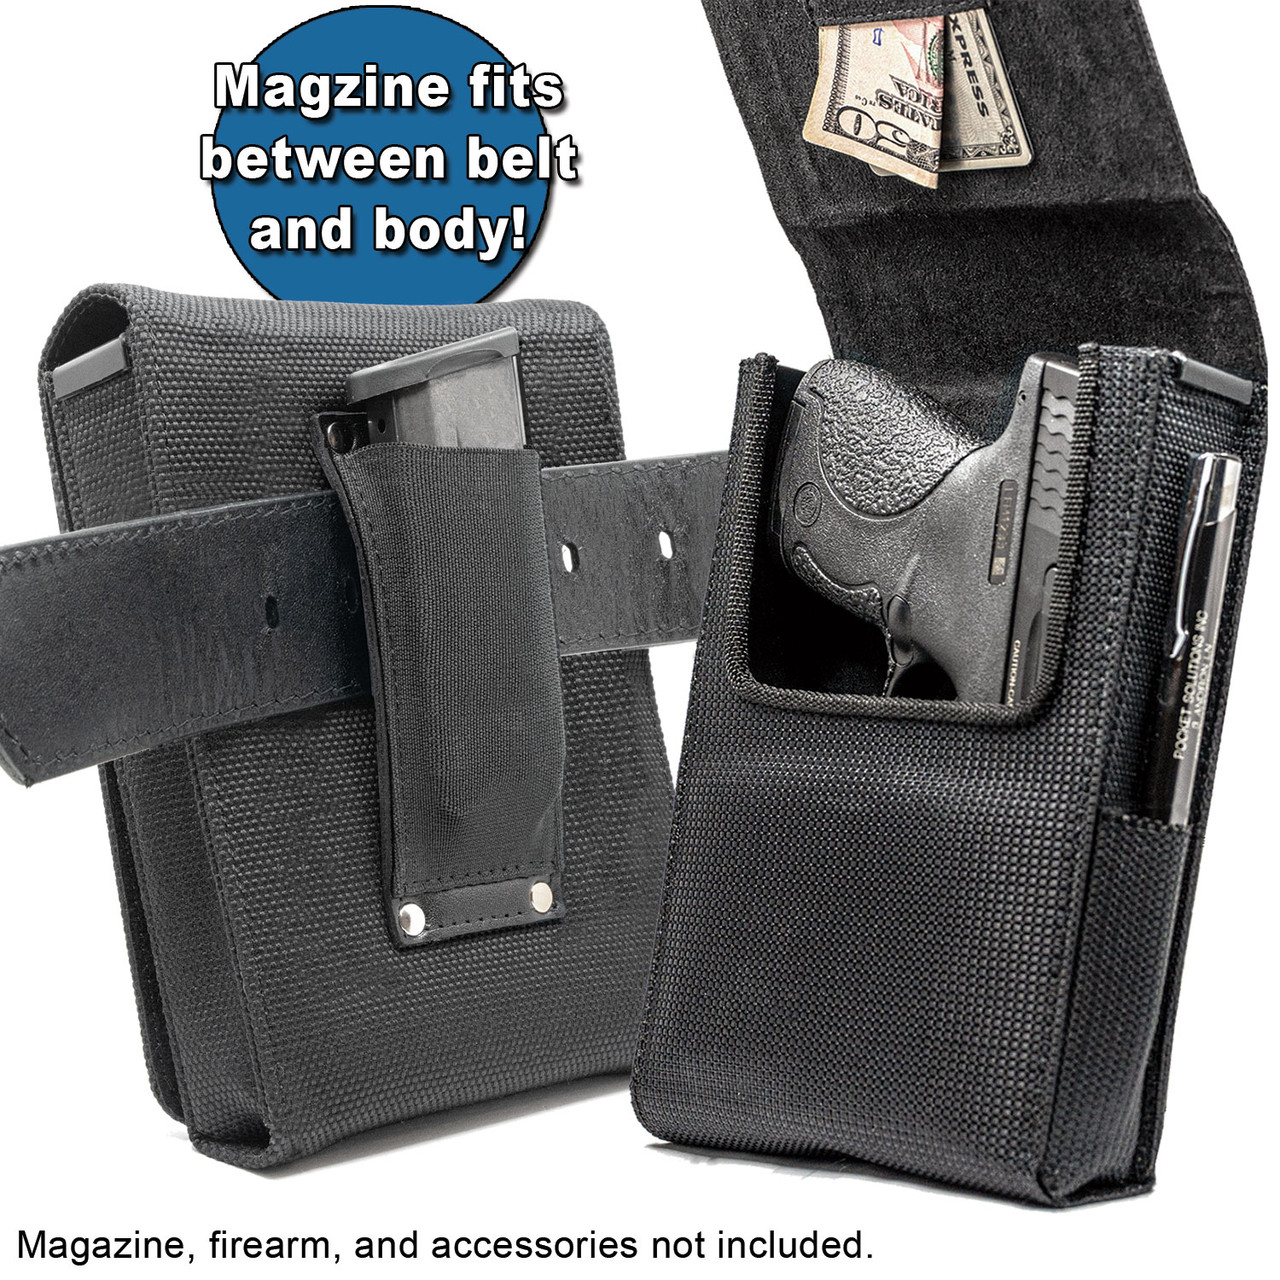 The Ruger American 9 Compact Max Defense Holster